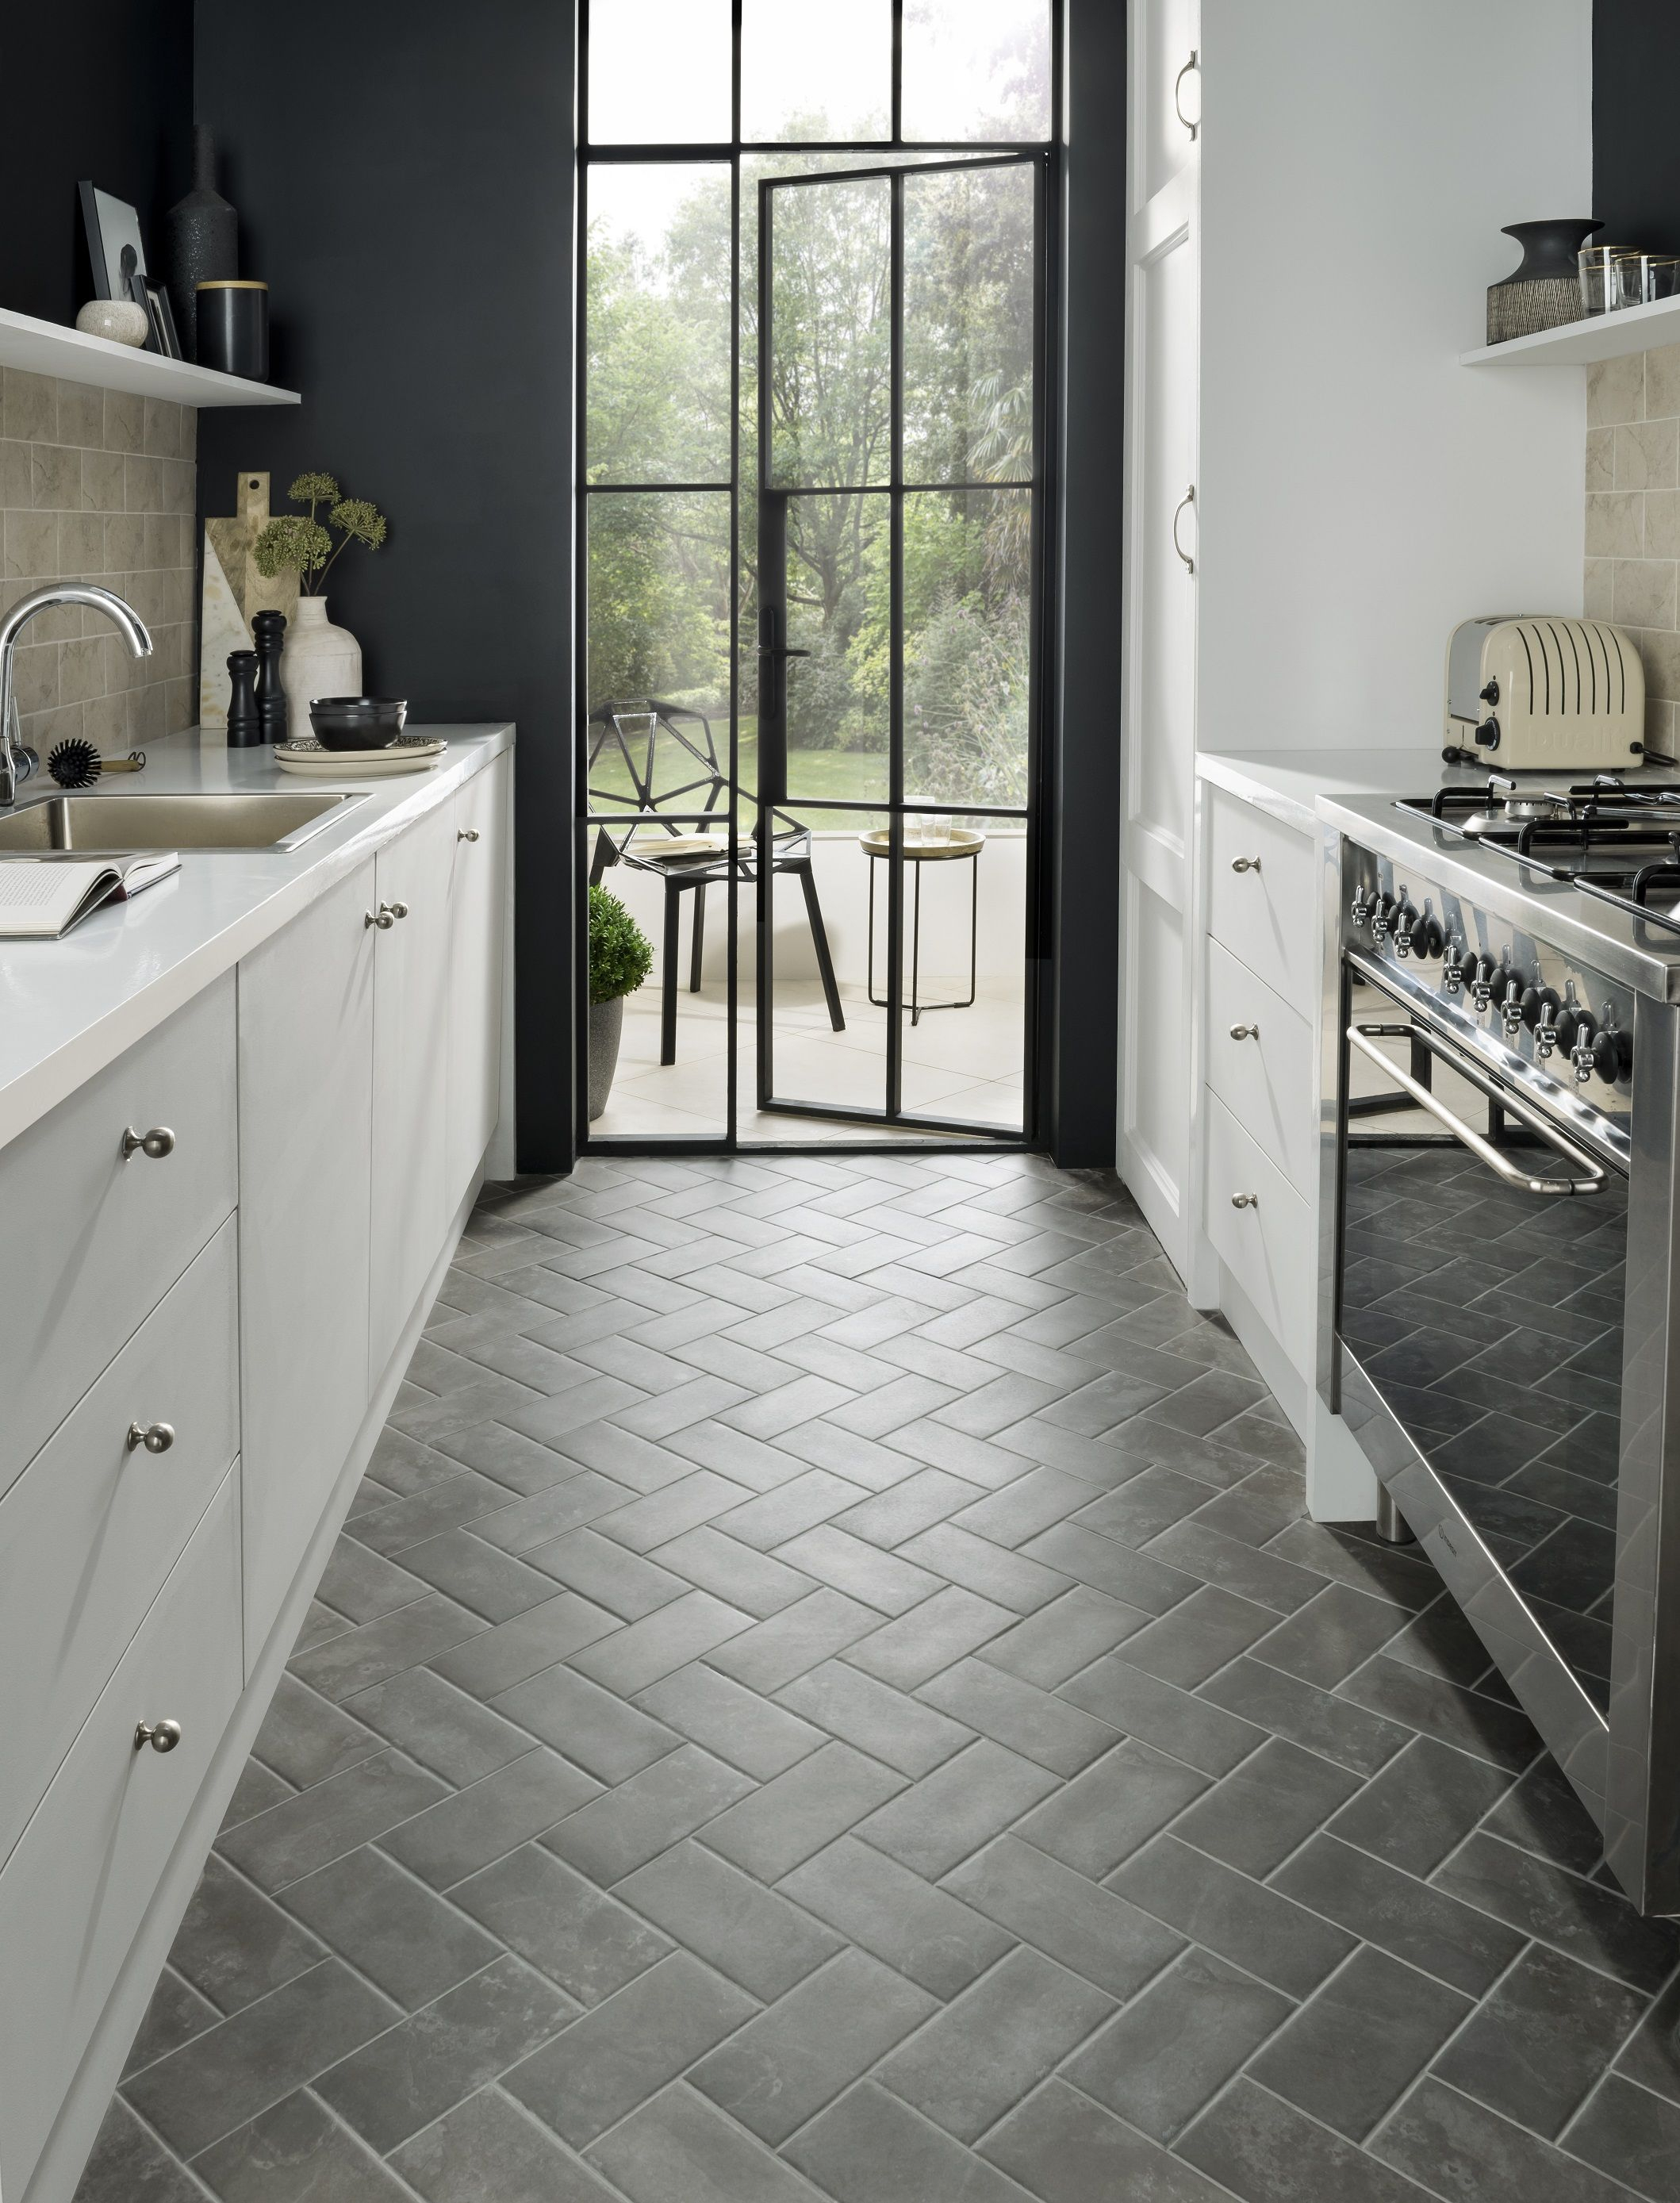 11 Tile Design Ideas To Make A Small Kitchen Feel Bigger within measurements 2118 X 2777